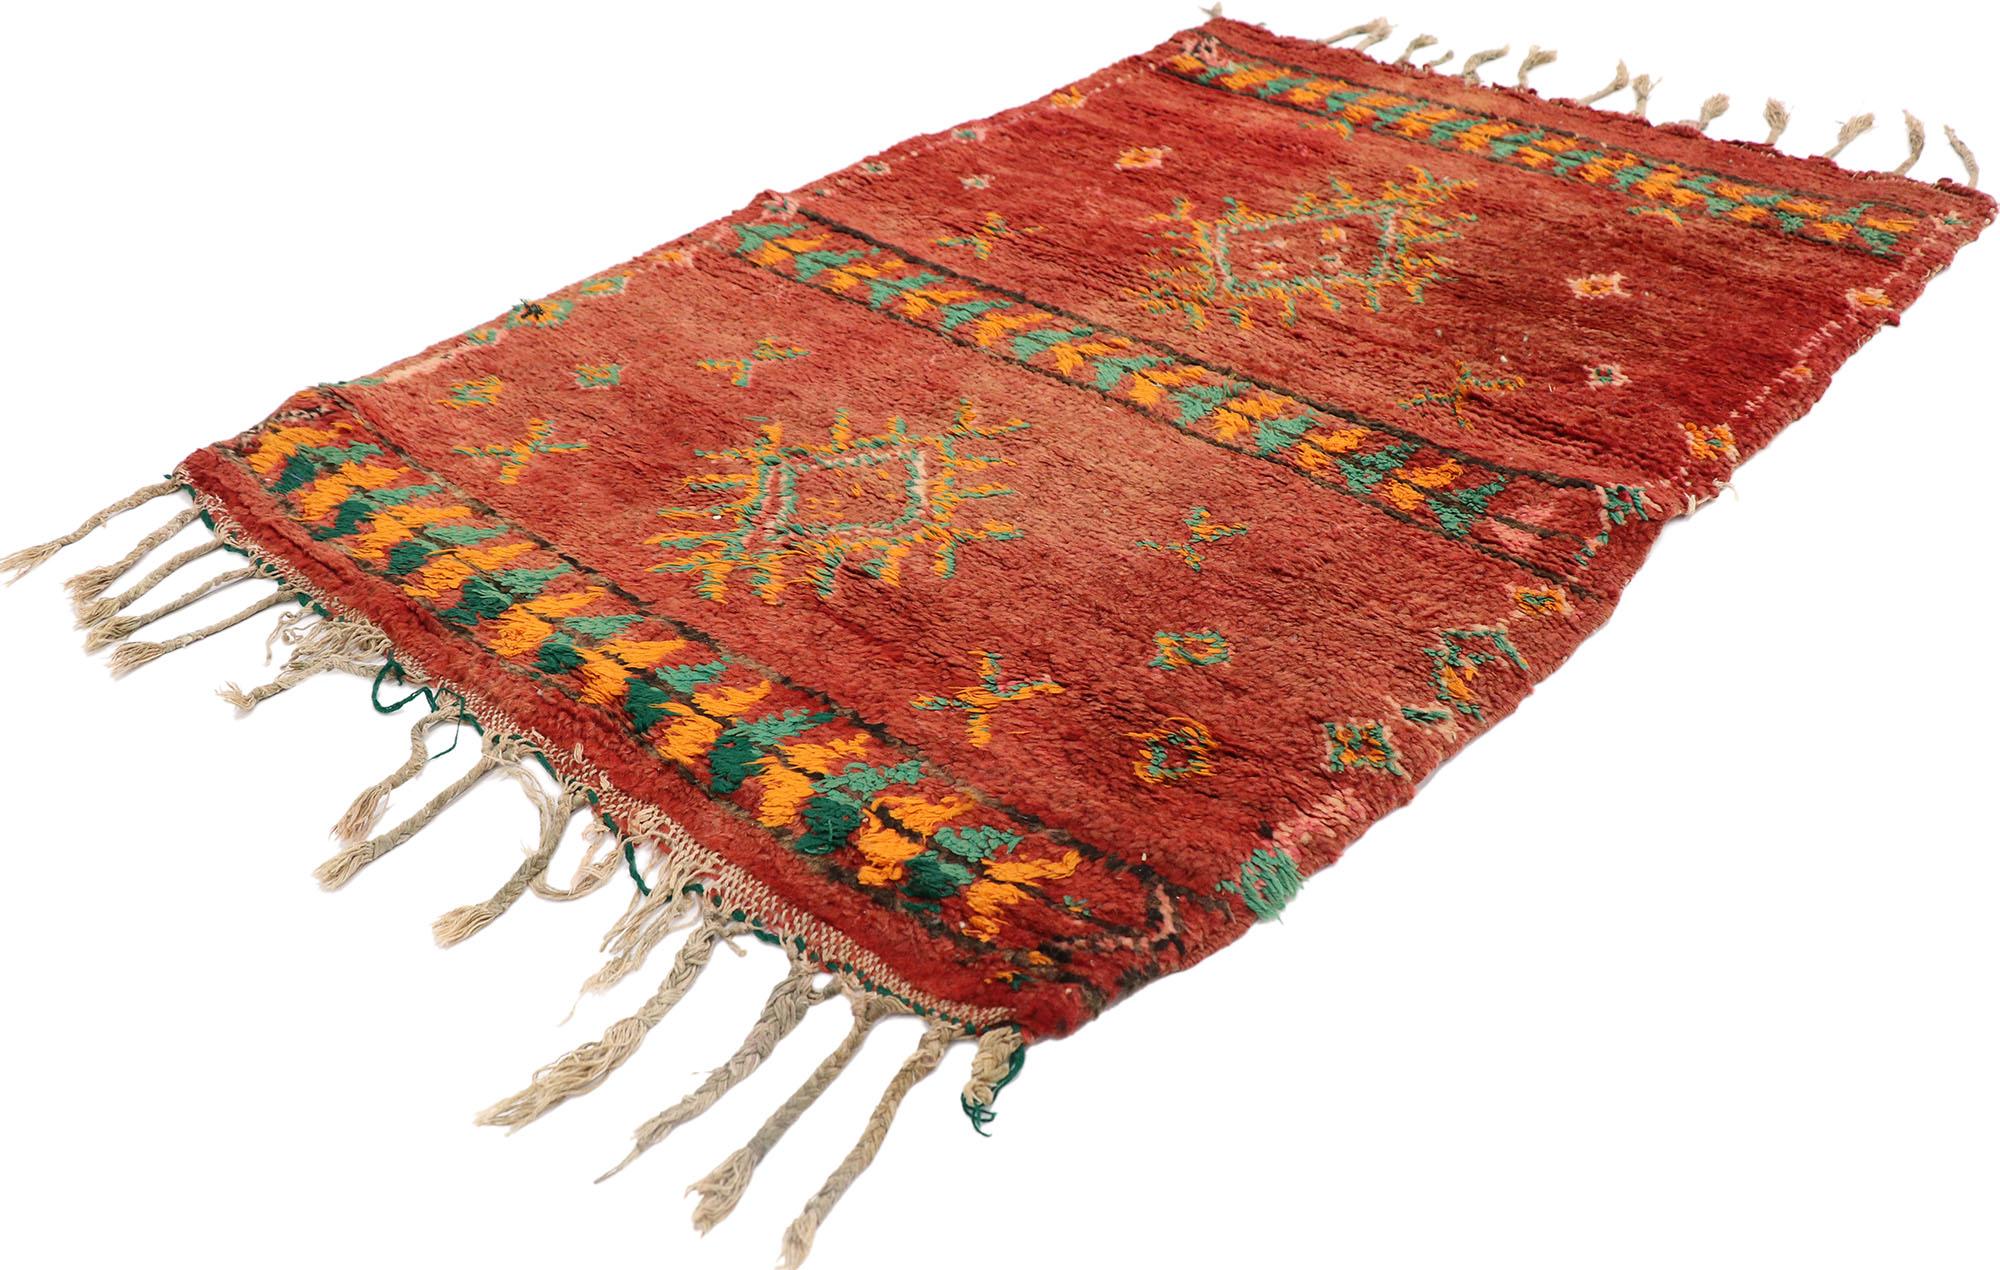 21533 Vintage Red Boujad Moroccan Rug, 02'09 x 04'00. Immerse yourself in the vibrant spirit of Boujad rugs, originating from the bustling city of Boujad in the Khouribga region. Woven with meticulous skill by Berber tribes, particularly the Haouz